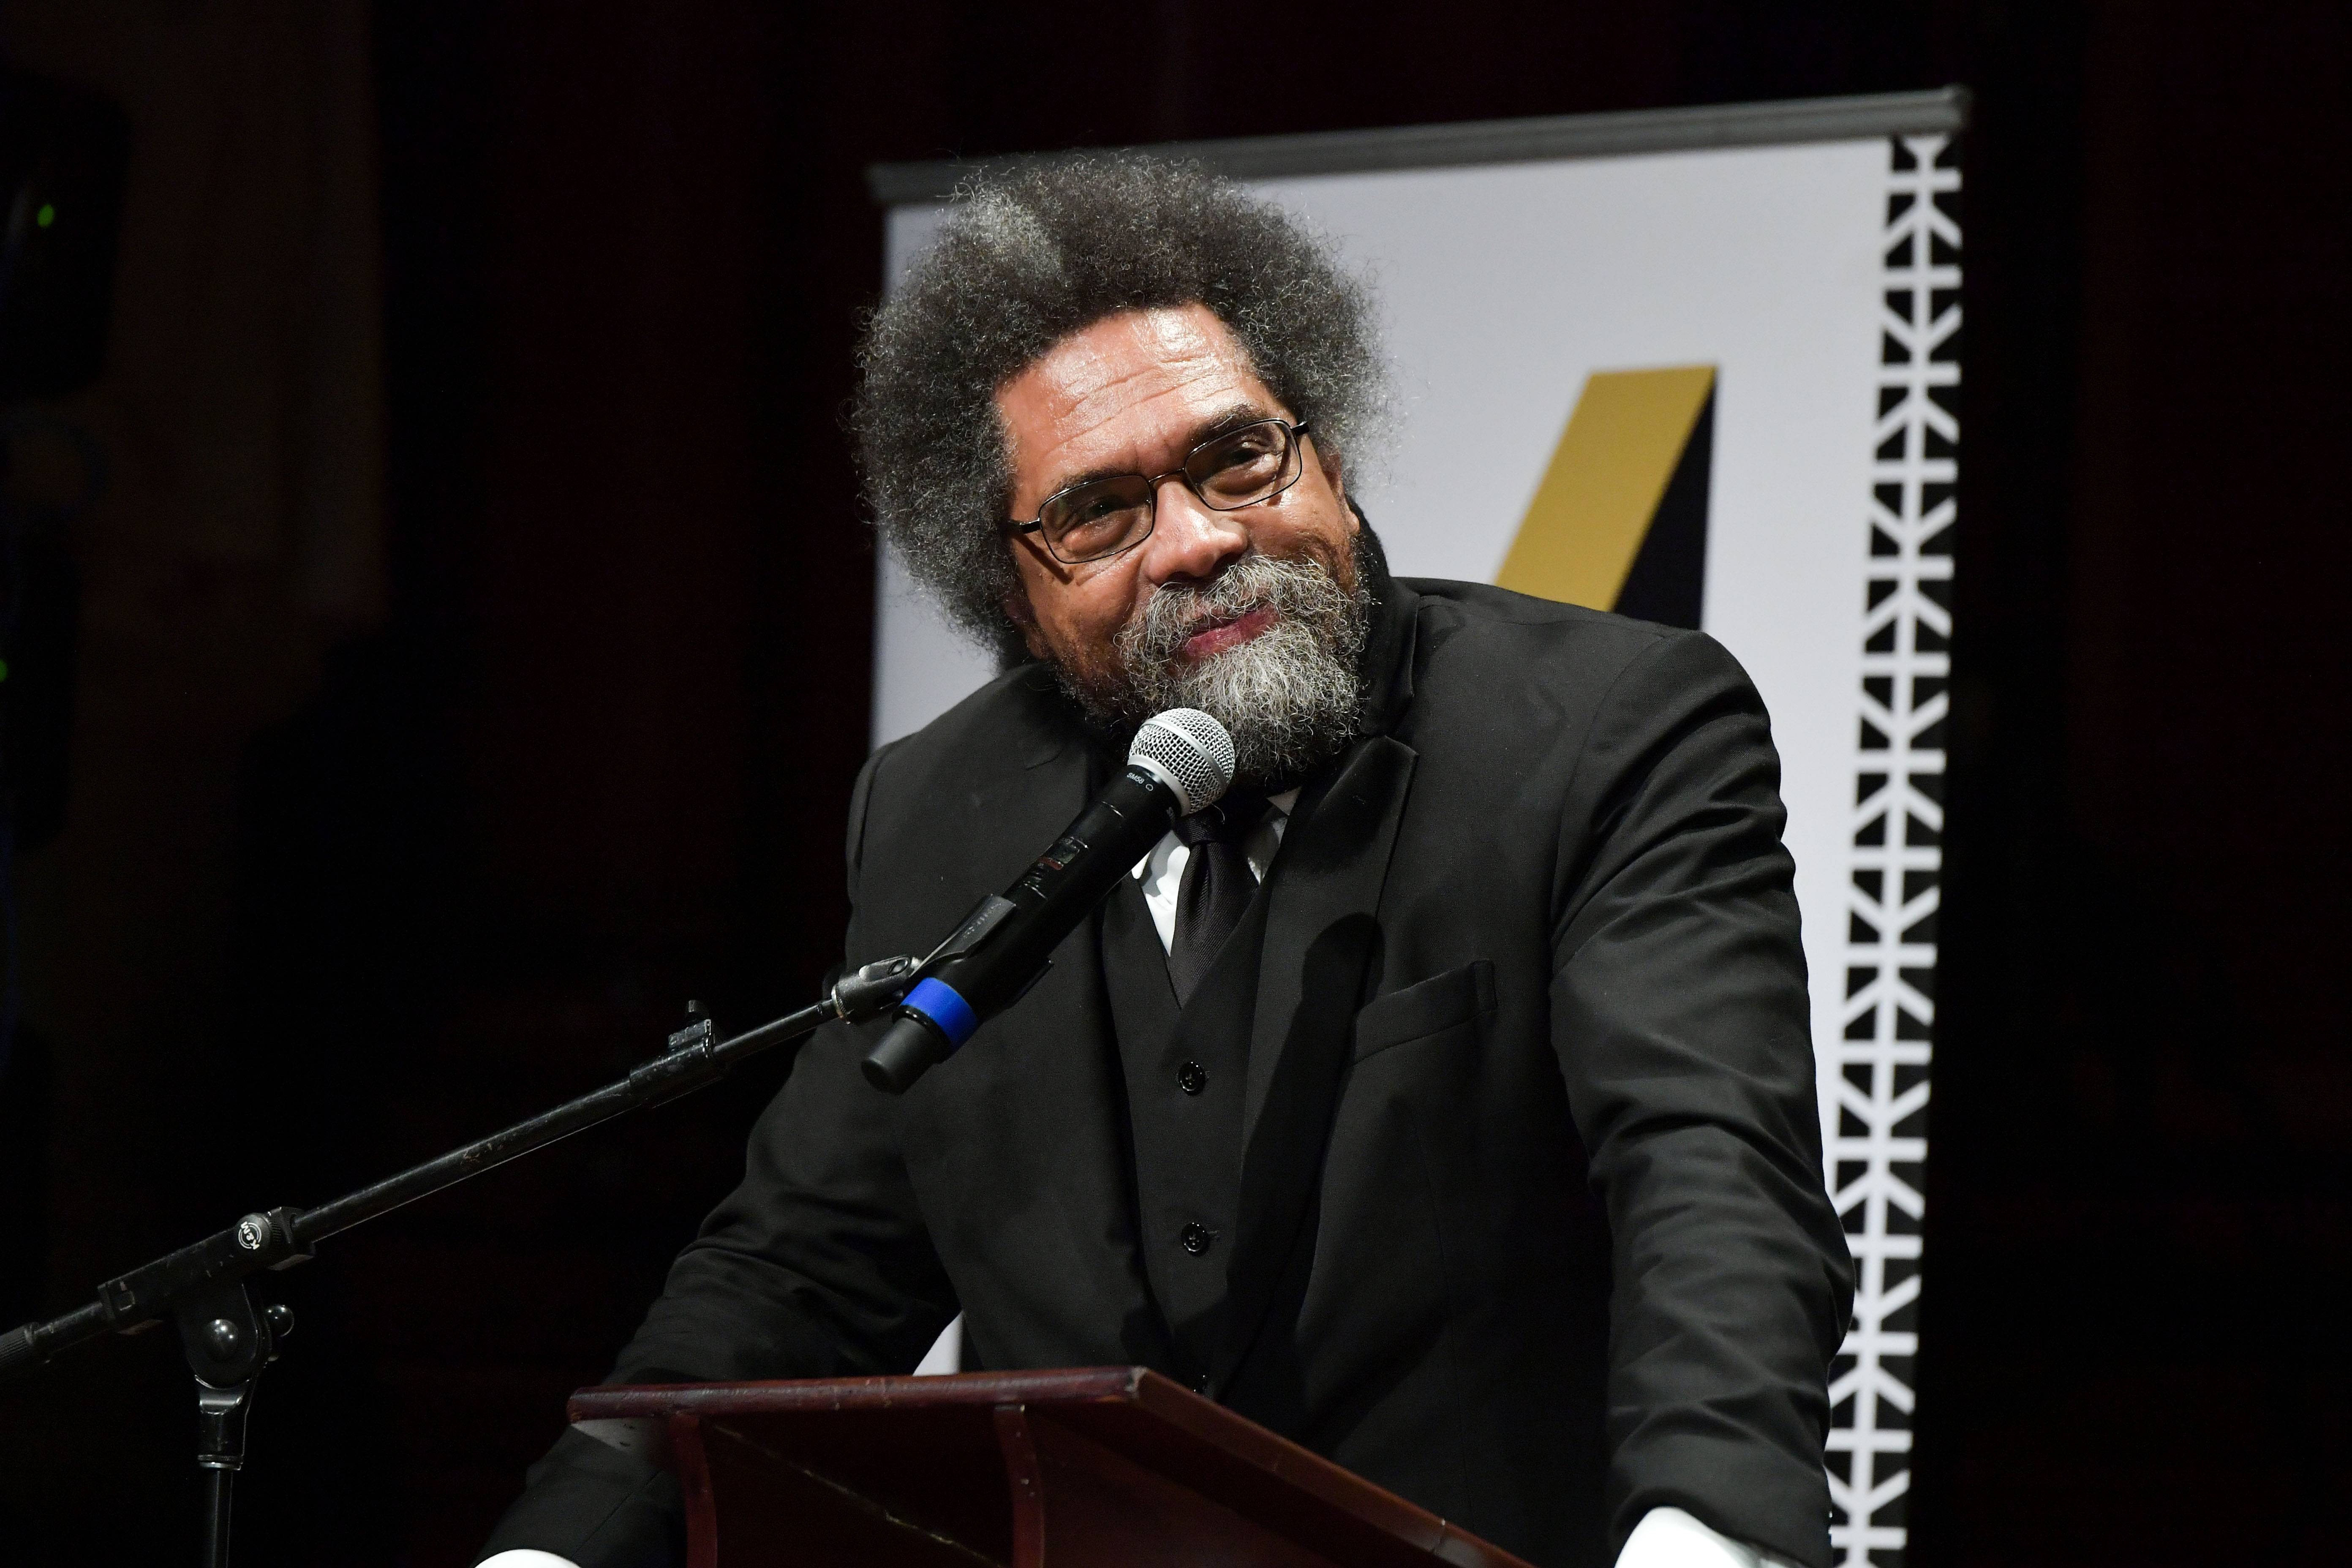 CAMBRIDGE, MA - OCTOBER 22:  Cornel West speaks at the 2019 Hutchins Center Honors W.E.B. Du Bois Medal Ceremony at Harvard University on October 22, 2019 in Cambridge, Massachusetts.  2019 award recipients included Sheila Johnson, Lonnie Bunch, Elizabeth Alexander, Kerry James Marshall, Rita Dove, Robert Smith and Queen Latifah.  (Photo by Paul Marotta/Getty Images)